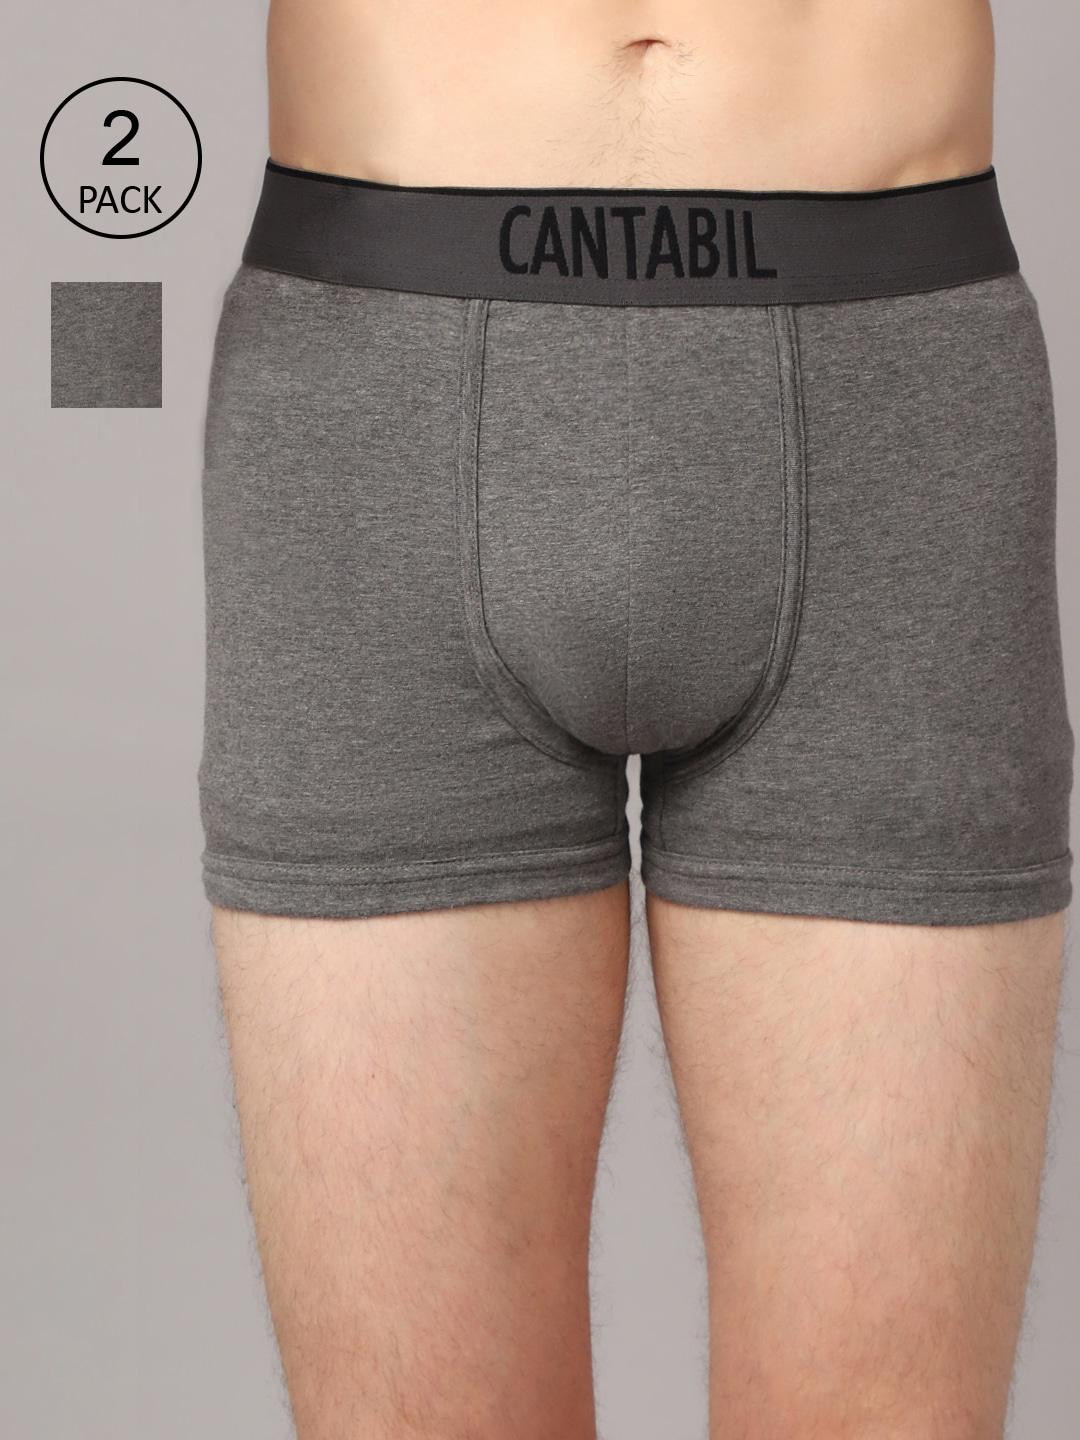 cantabil-men-pack-of-2-grey-solid-basic-briefs